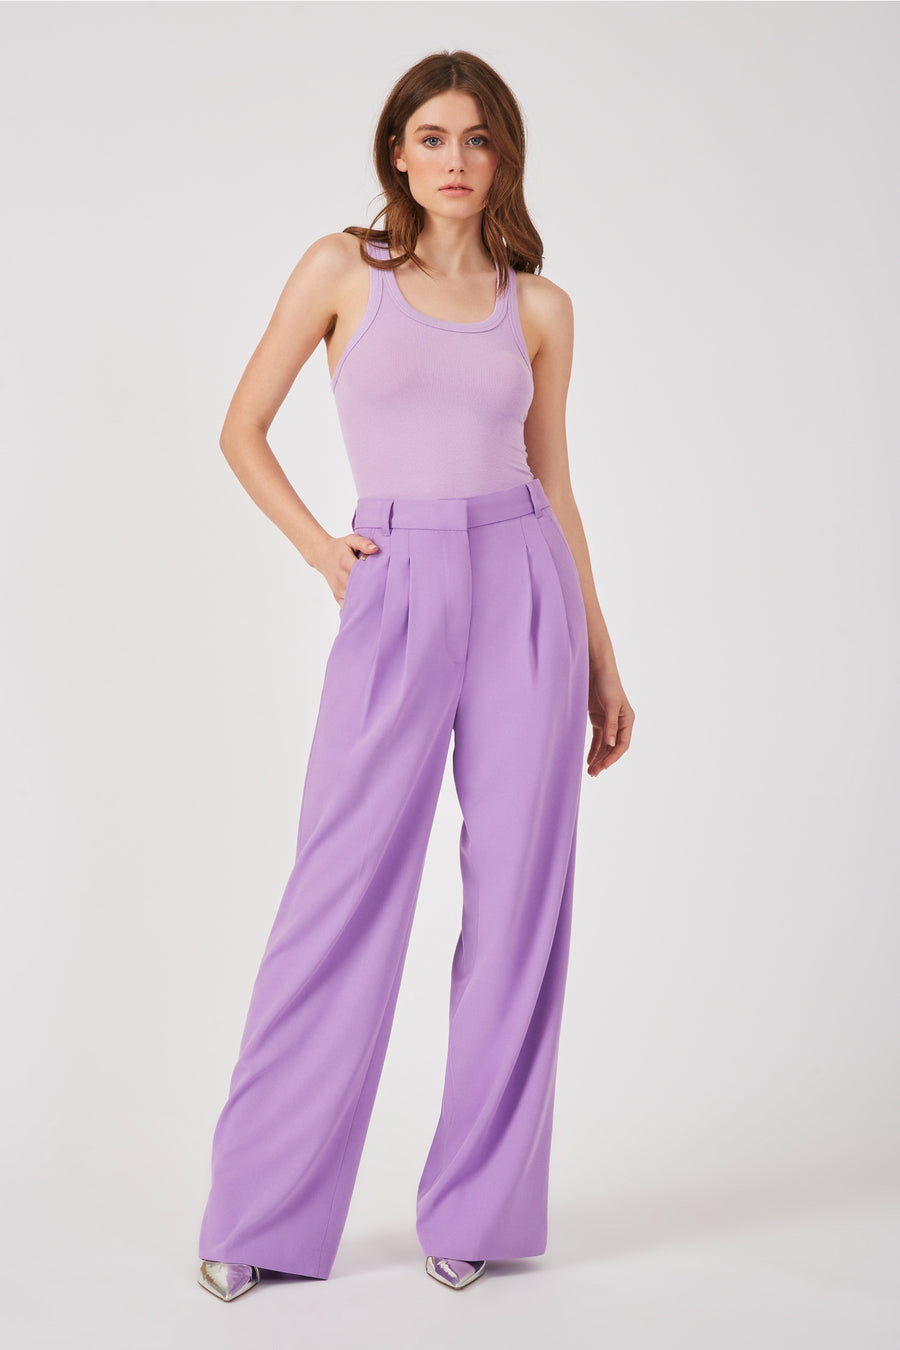 SWATCH THE MACADEN PLEATED TROUSER